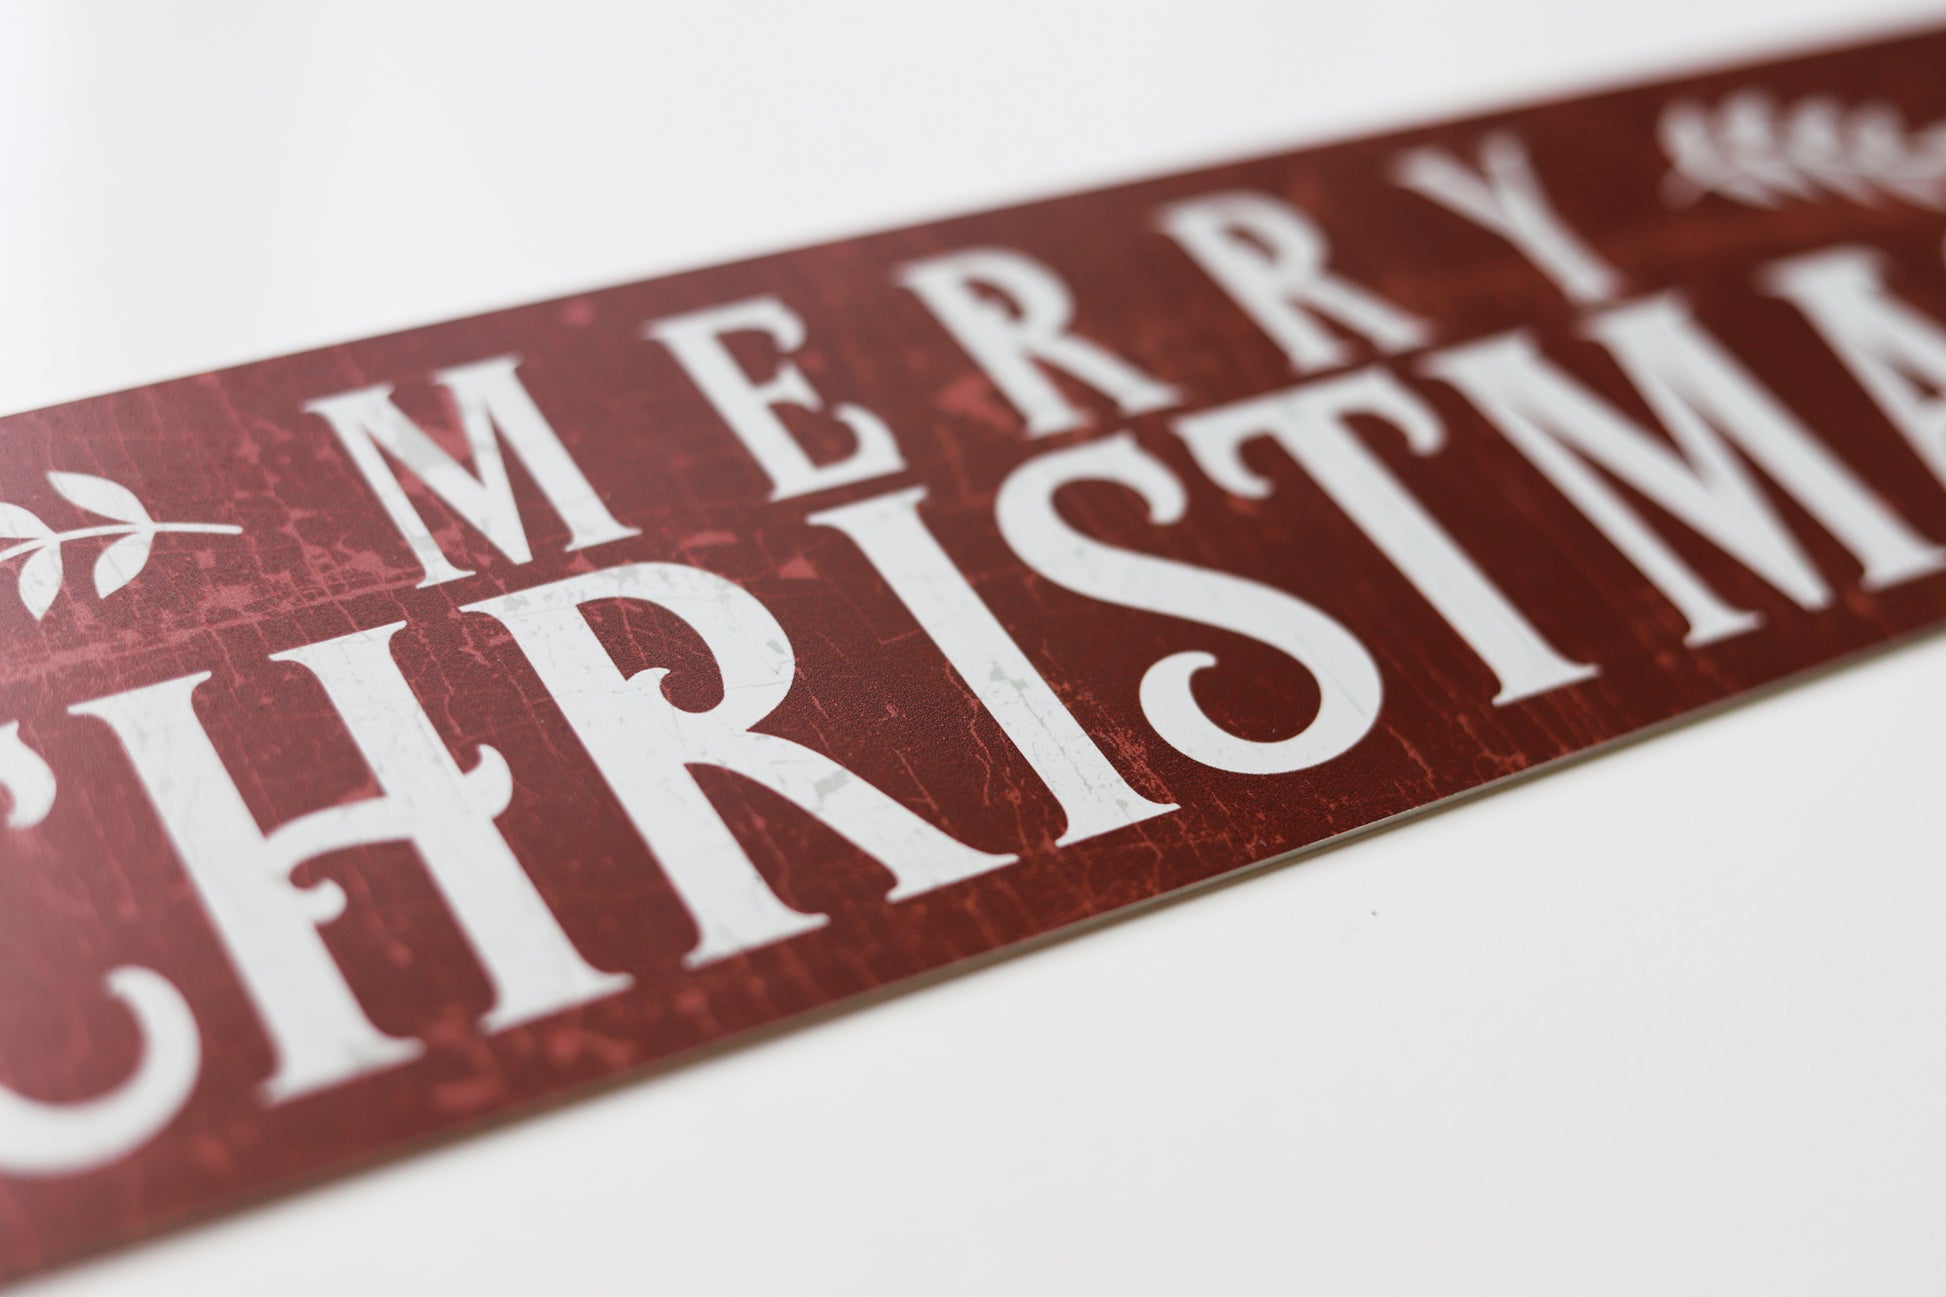 Rustic Red "Merry Christmas" Metal Sign - The Sign Shoppe 